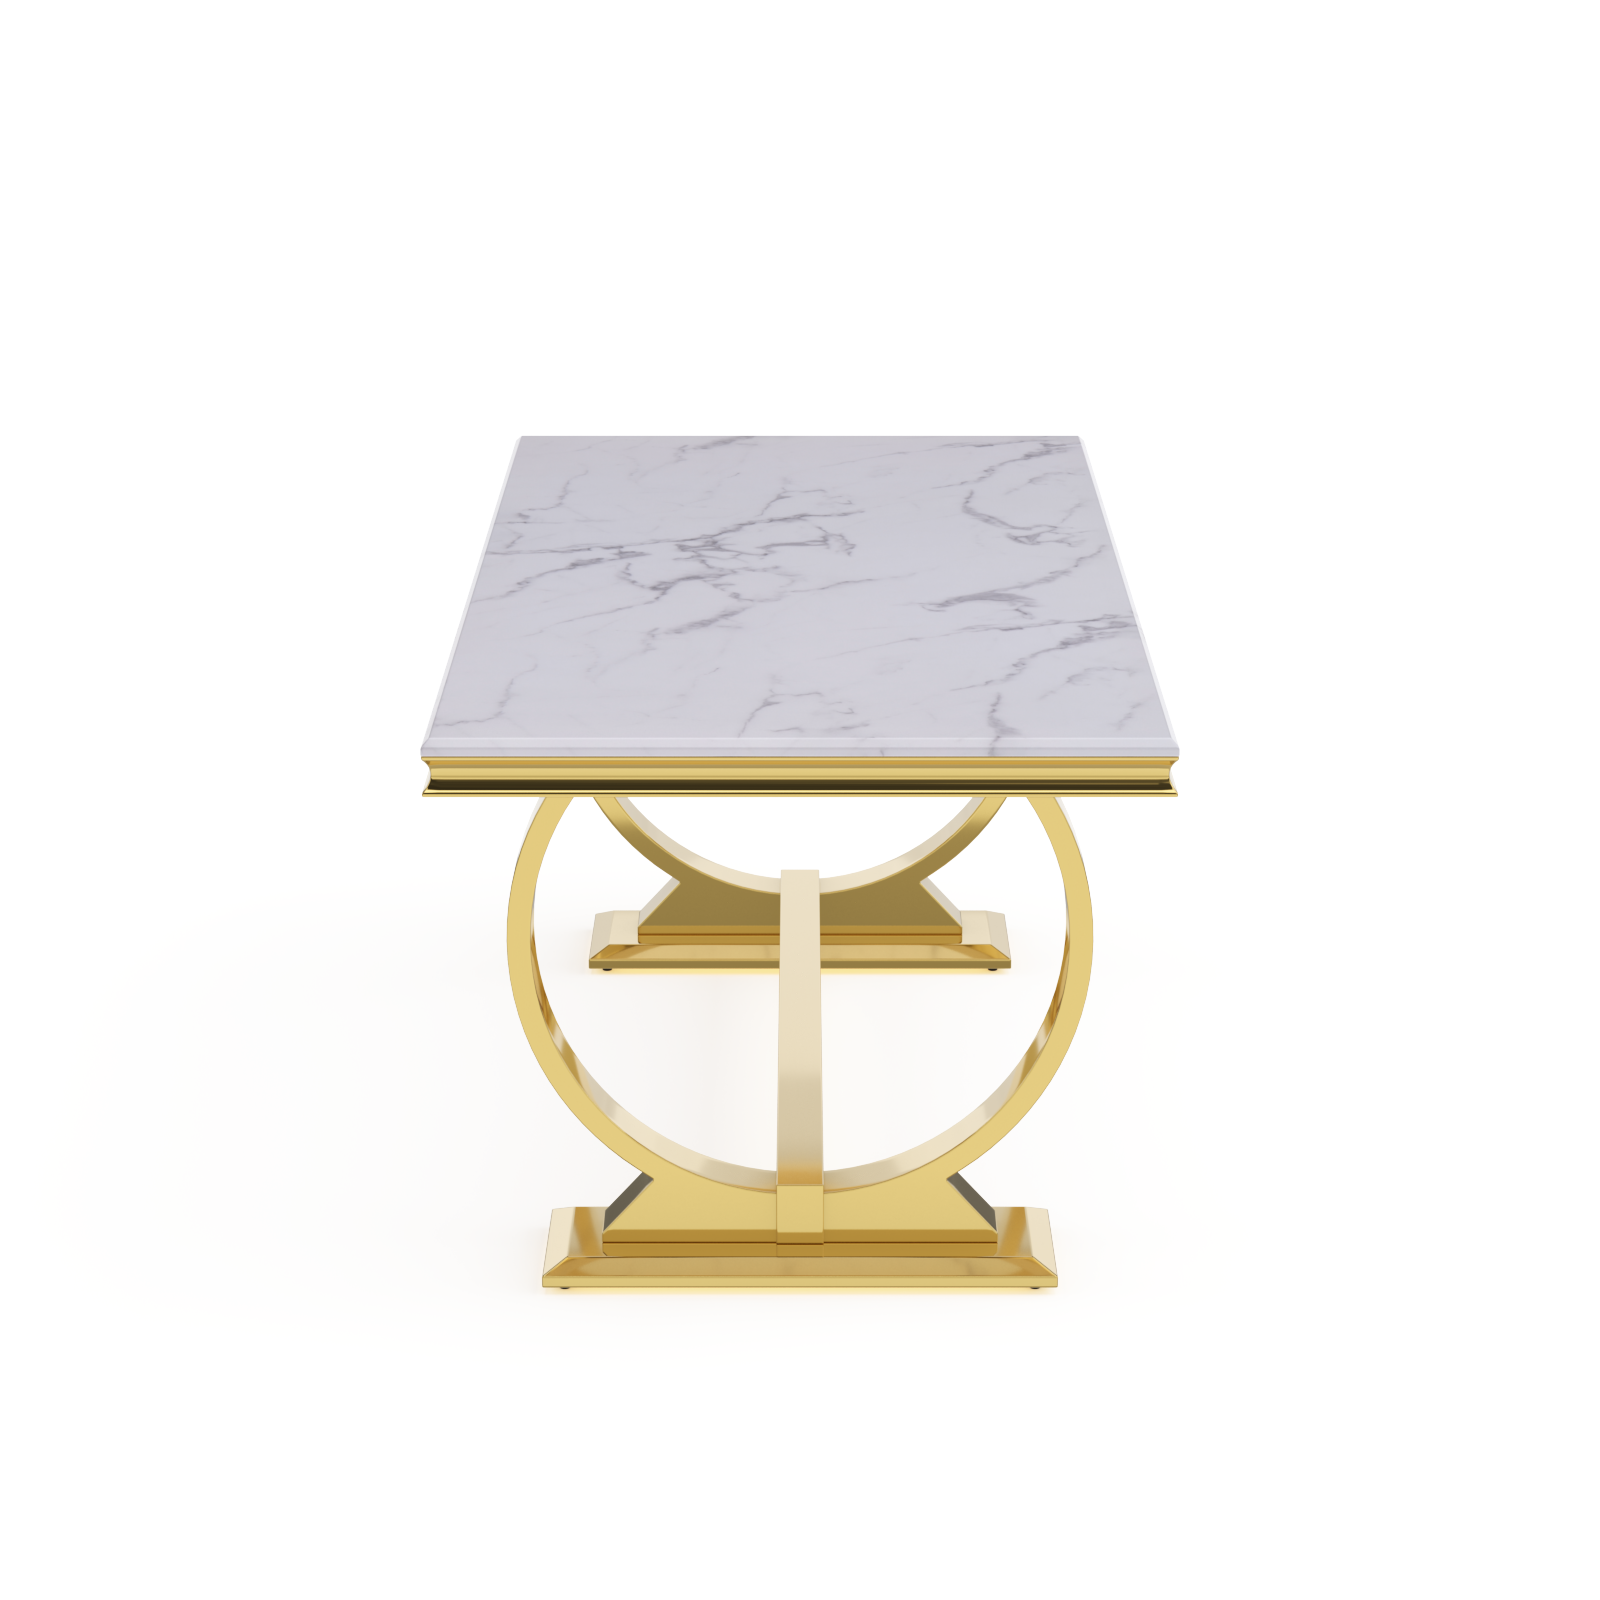 Modern Dining Room Table with Gold Stainless Steel Metal U-Base in White Gold | T206